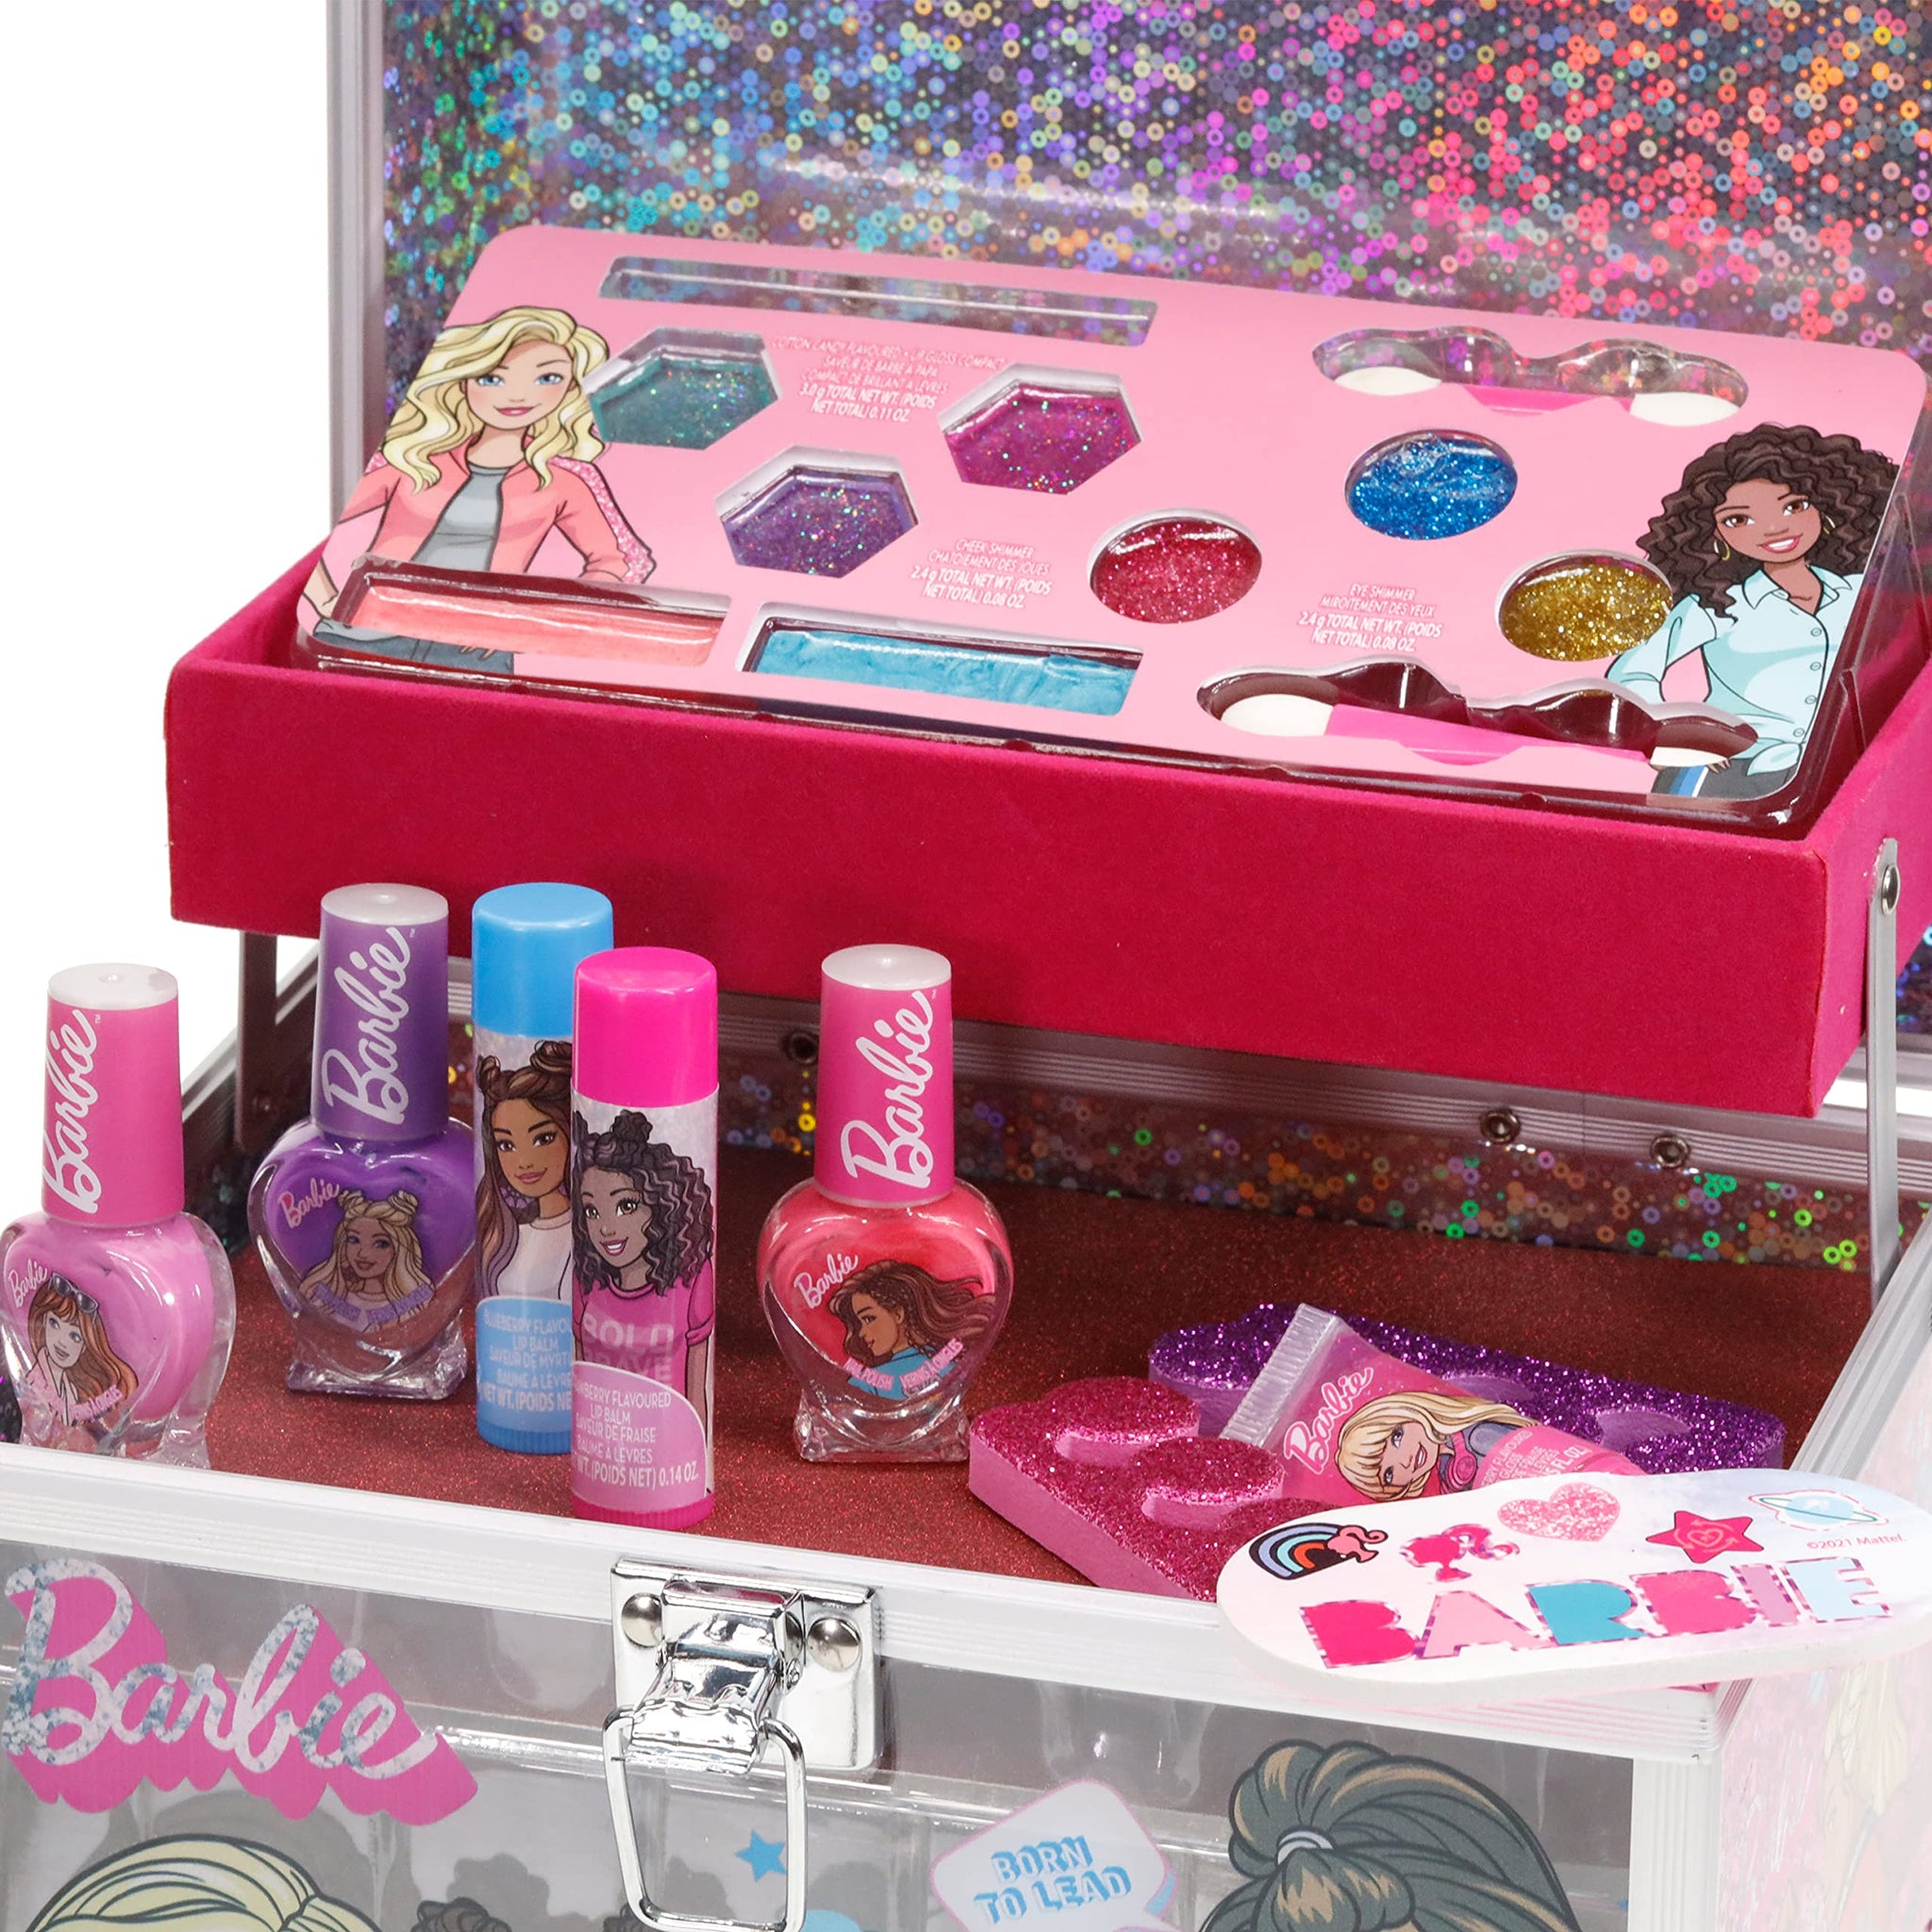 Townley Girl Barbie Beauty Vanity Set with Light-Up Mirror, Includes Lip  Gloss, Eye Shadow, Brushes, Nail Polish, Accessories, and More!, Ages 3+